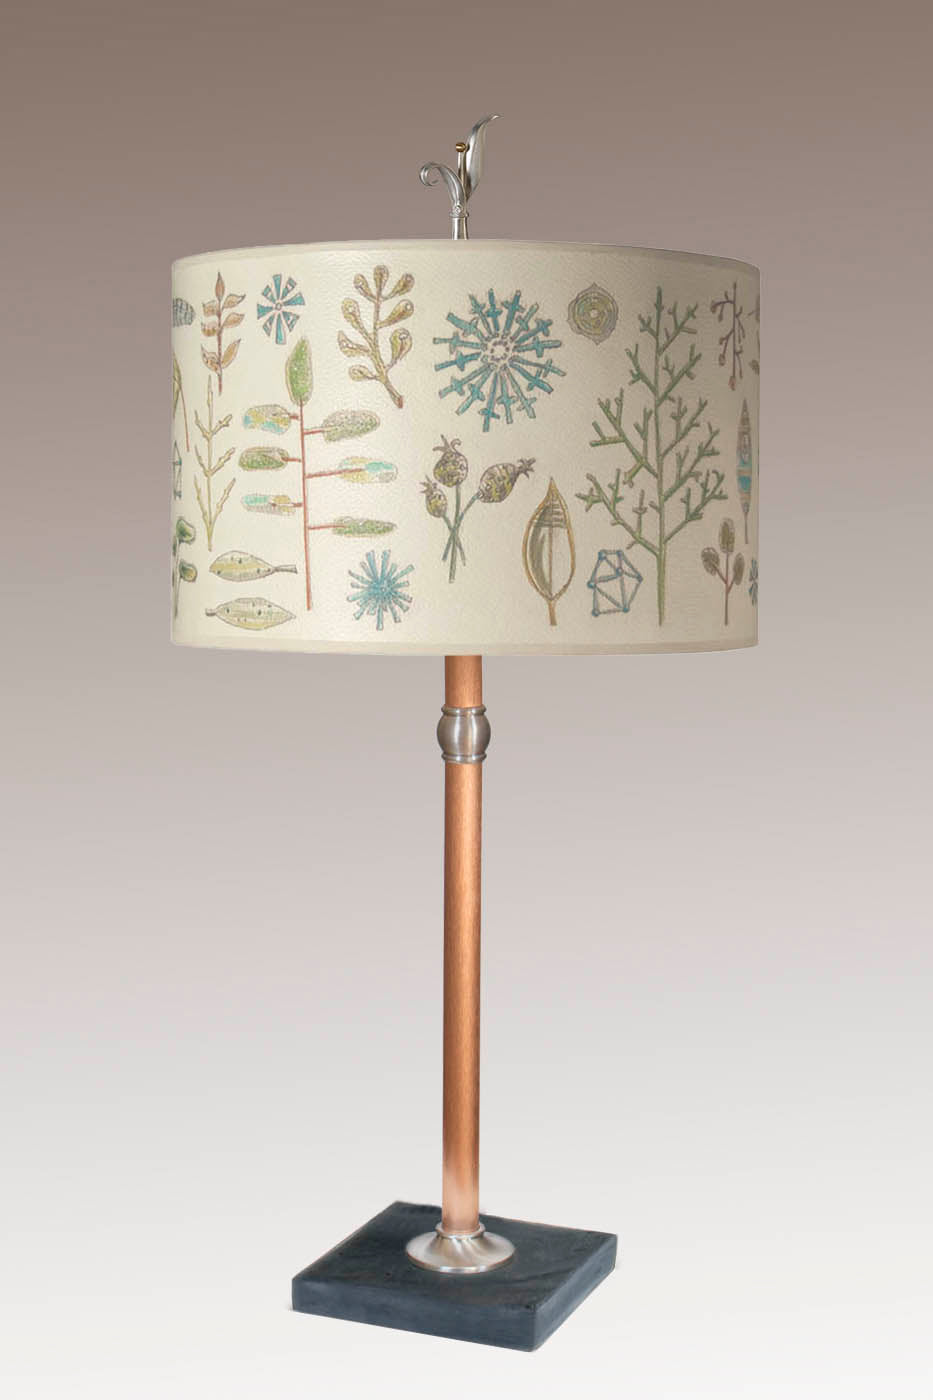 Janna Ugone & Co Table Lamp Copper Table Lamp with Large Drum Shade in Field Chart